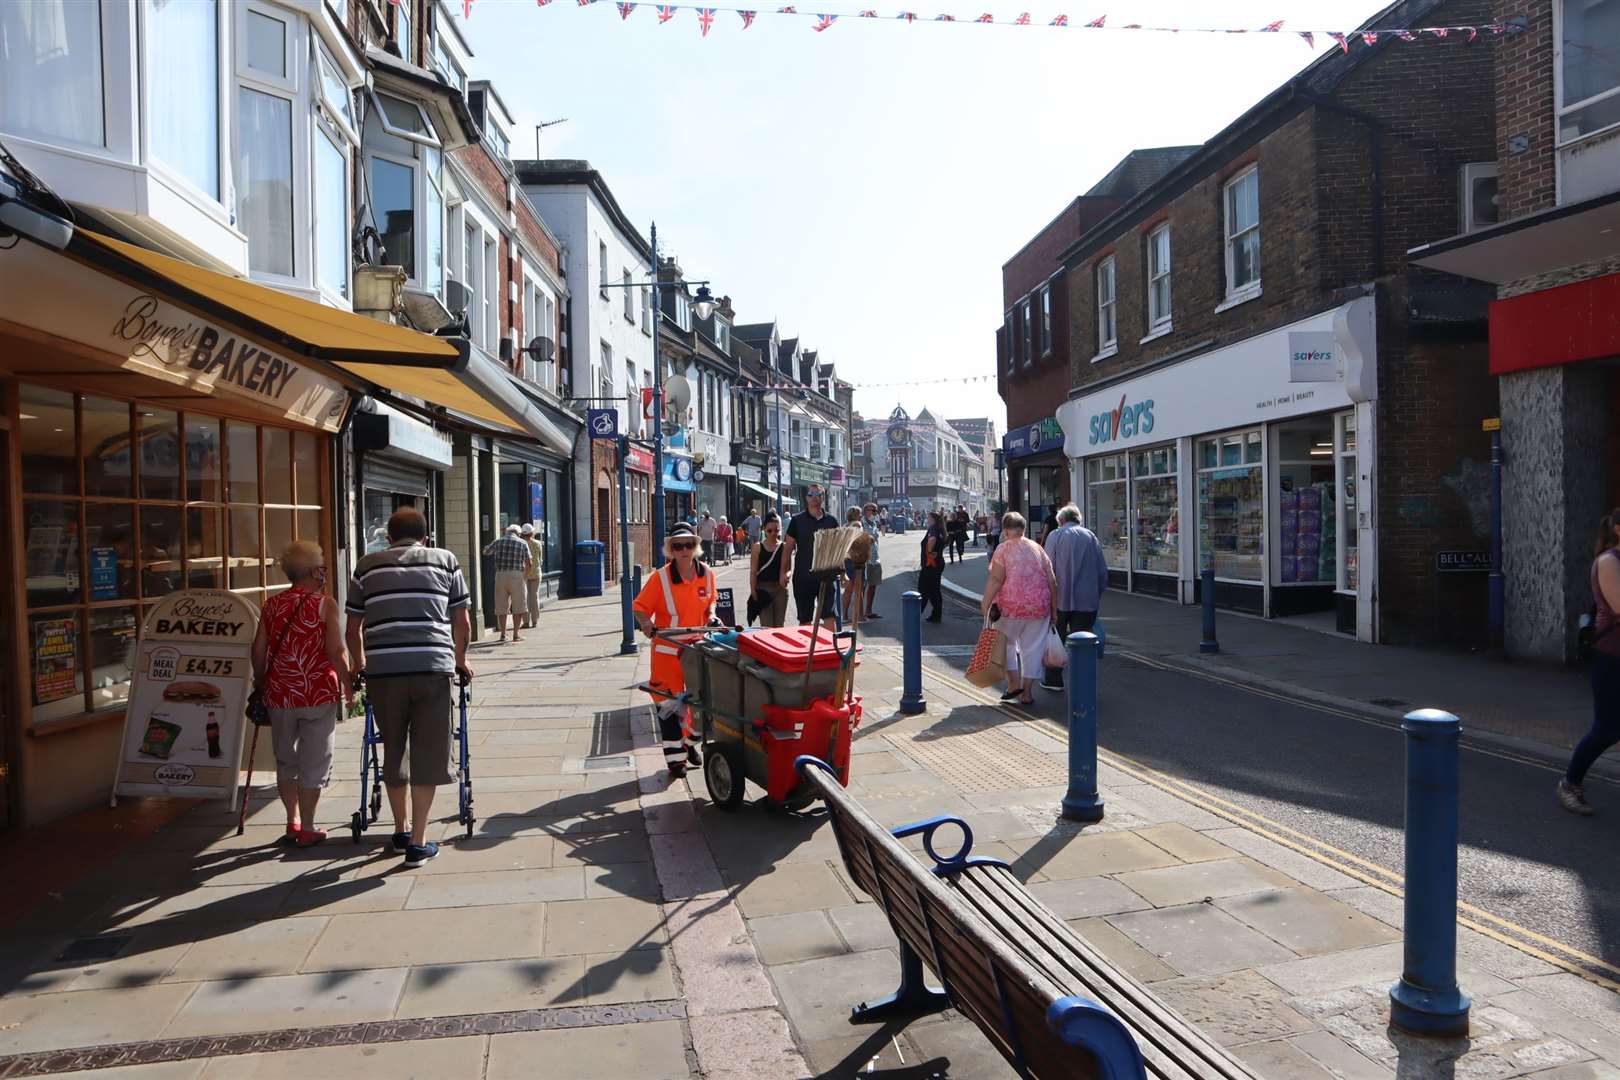 Shoppers in Sheerness High Street after the coronavirus lockdown